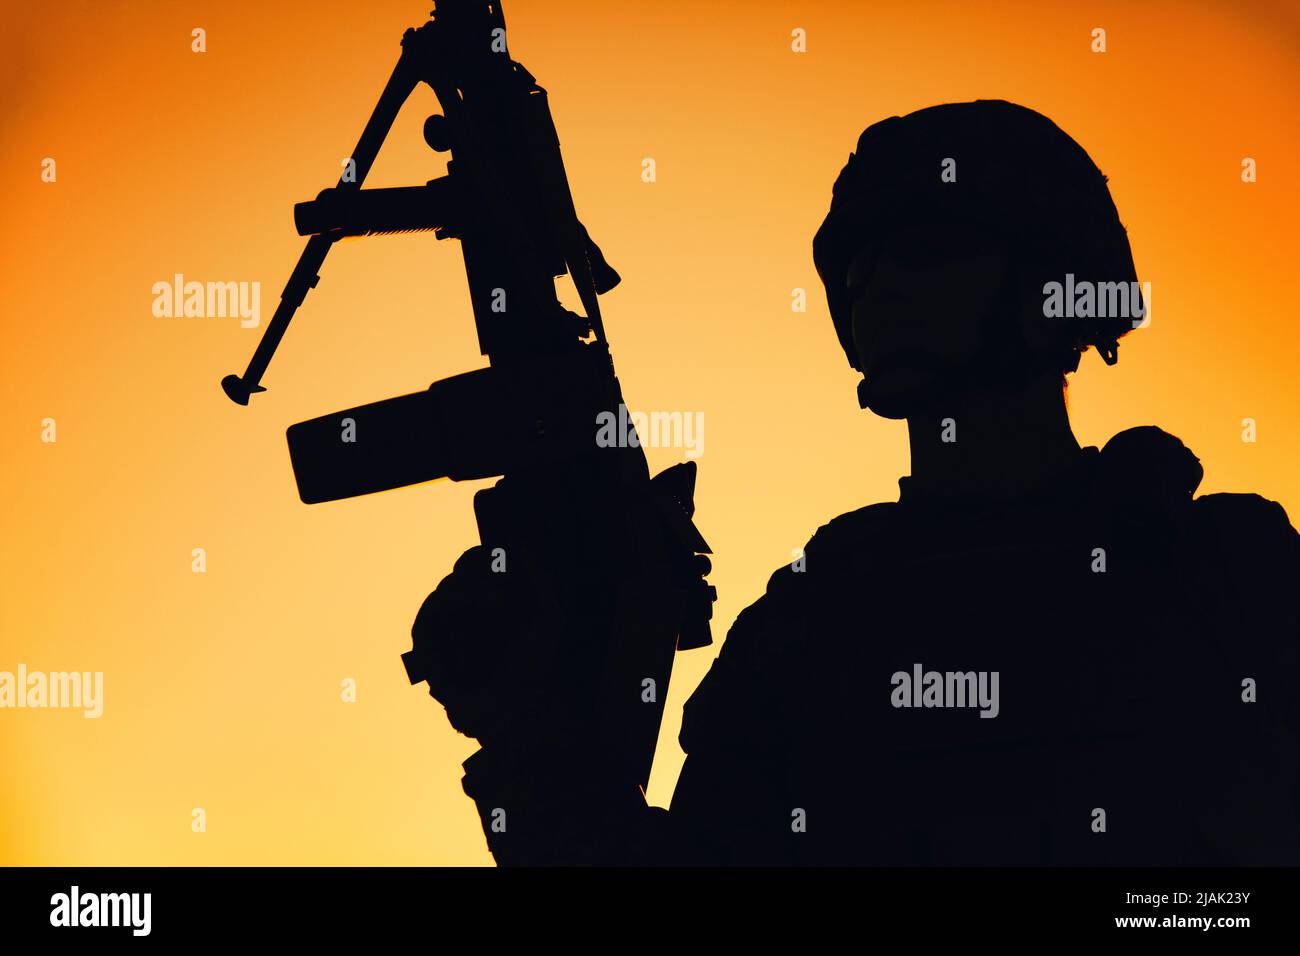 Silhouette of a soldier holding weapon at dawn. Stock Photo